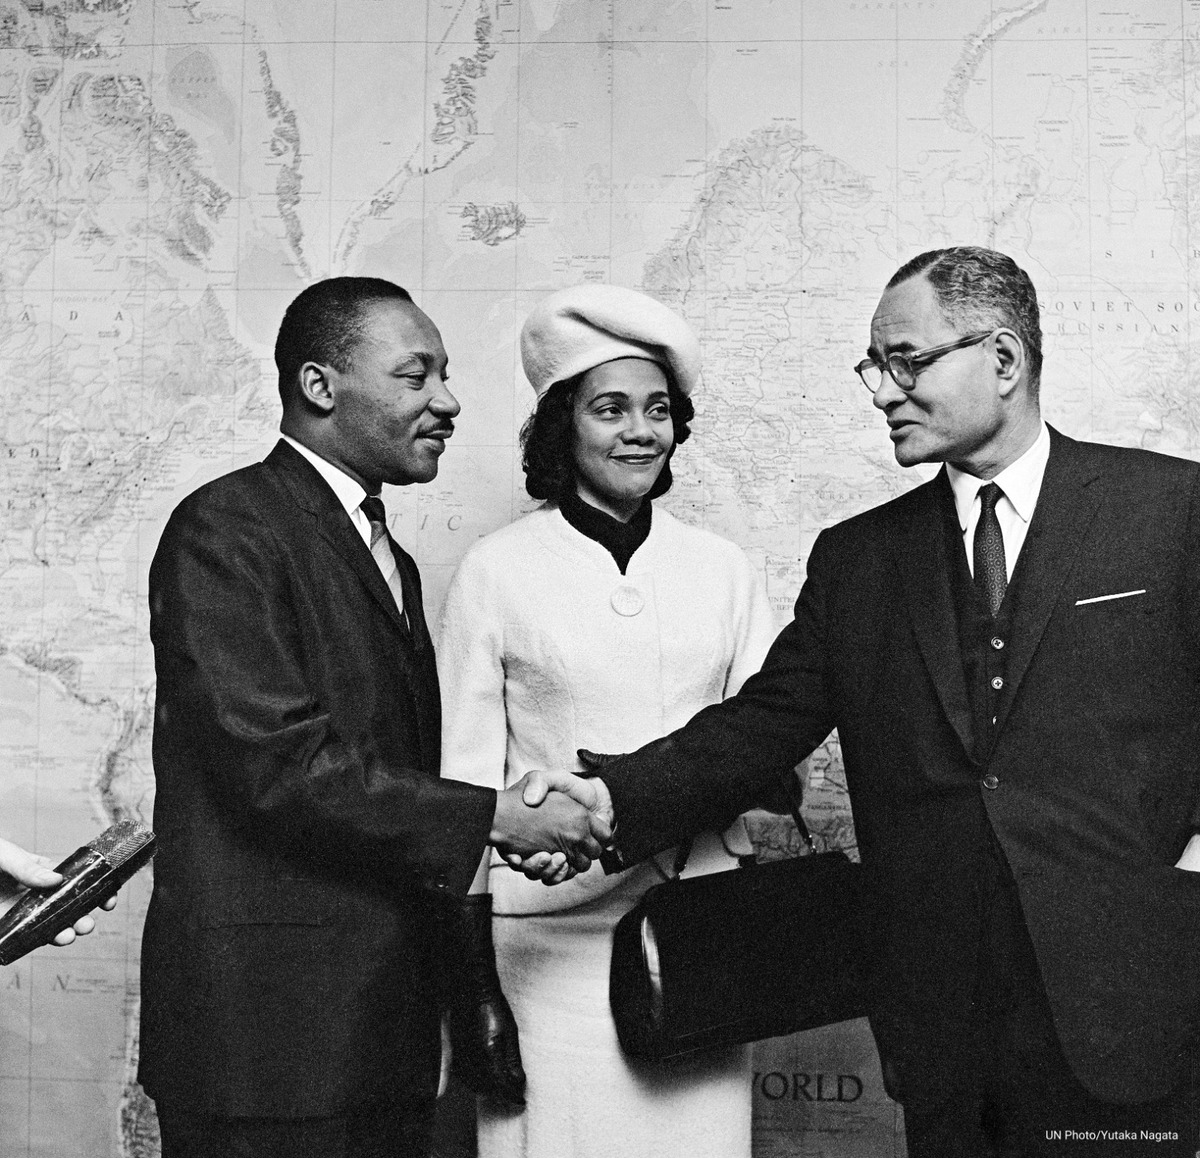 📷: Visionary civil rights leader Dr. Martin Luther King and his wife, Coretta Scott King, are welcomed at UNHQ in New York in 1964.

All of us can be human rights champions & #FightRacism on Monday's Martin Luther King Day and every day. un.org/en/fight-racism #MLKDay